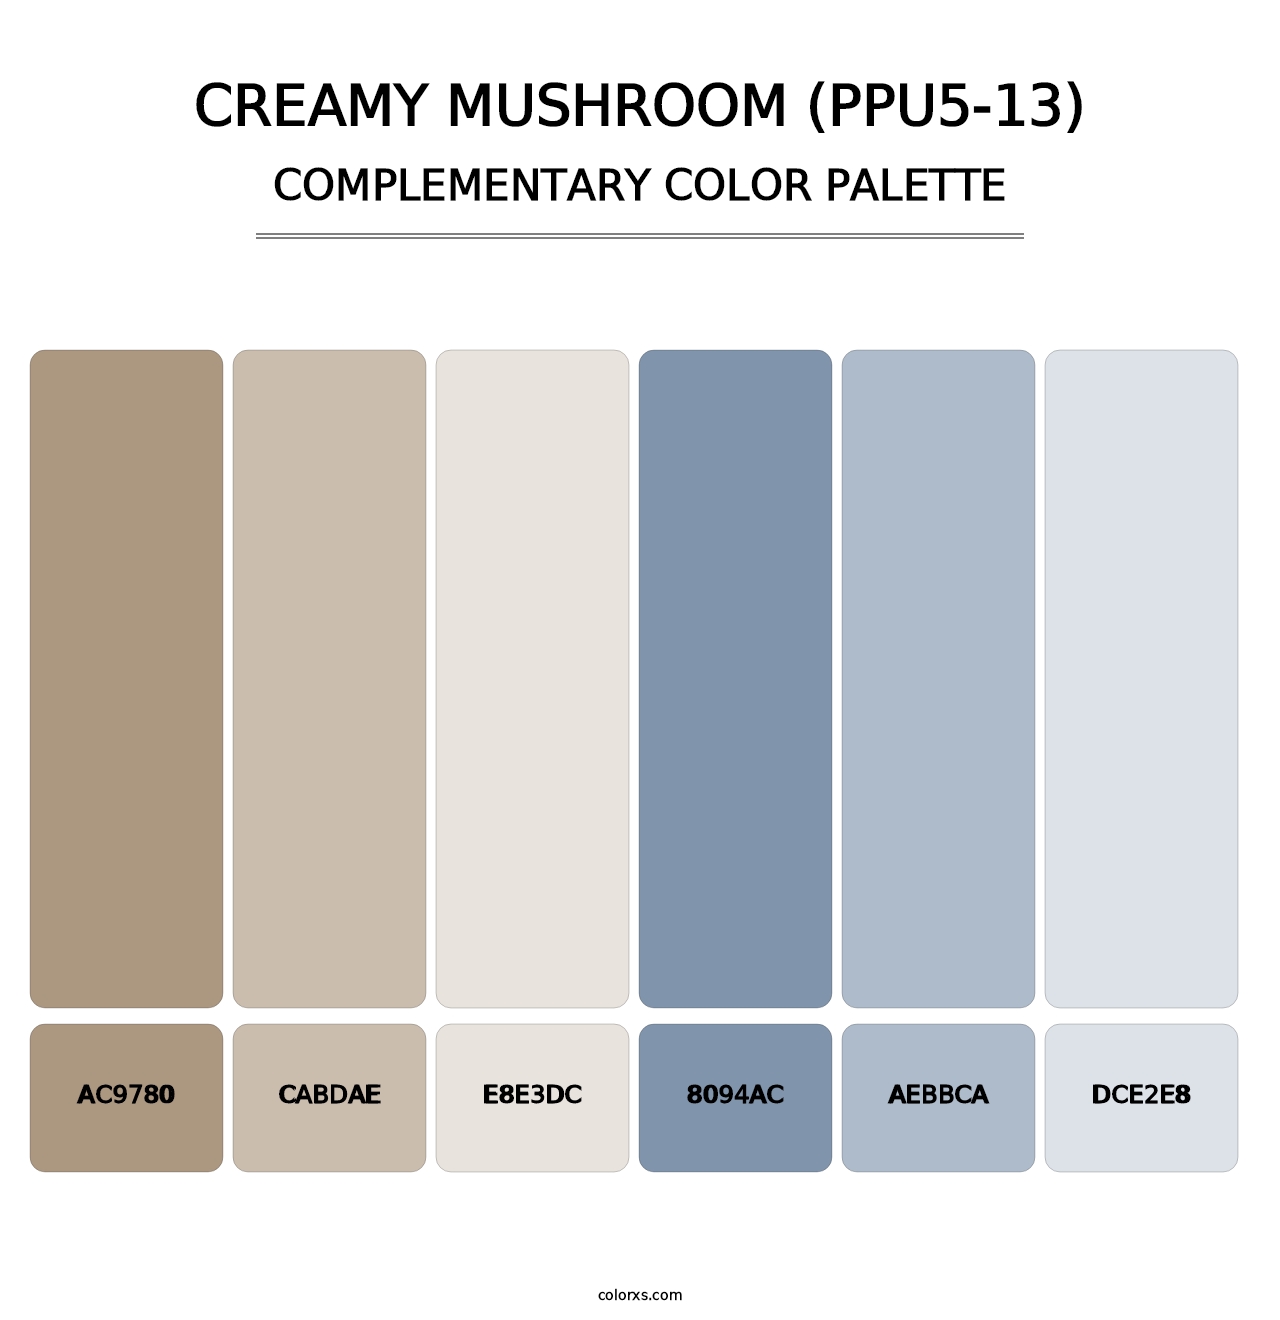 Creamy Mushroom (PPU5-13) - Complementary Color Palette